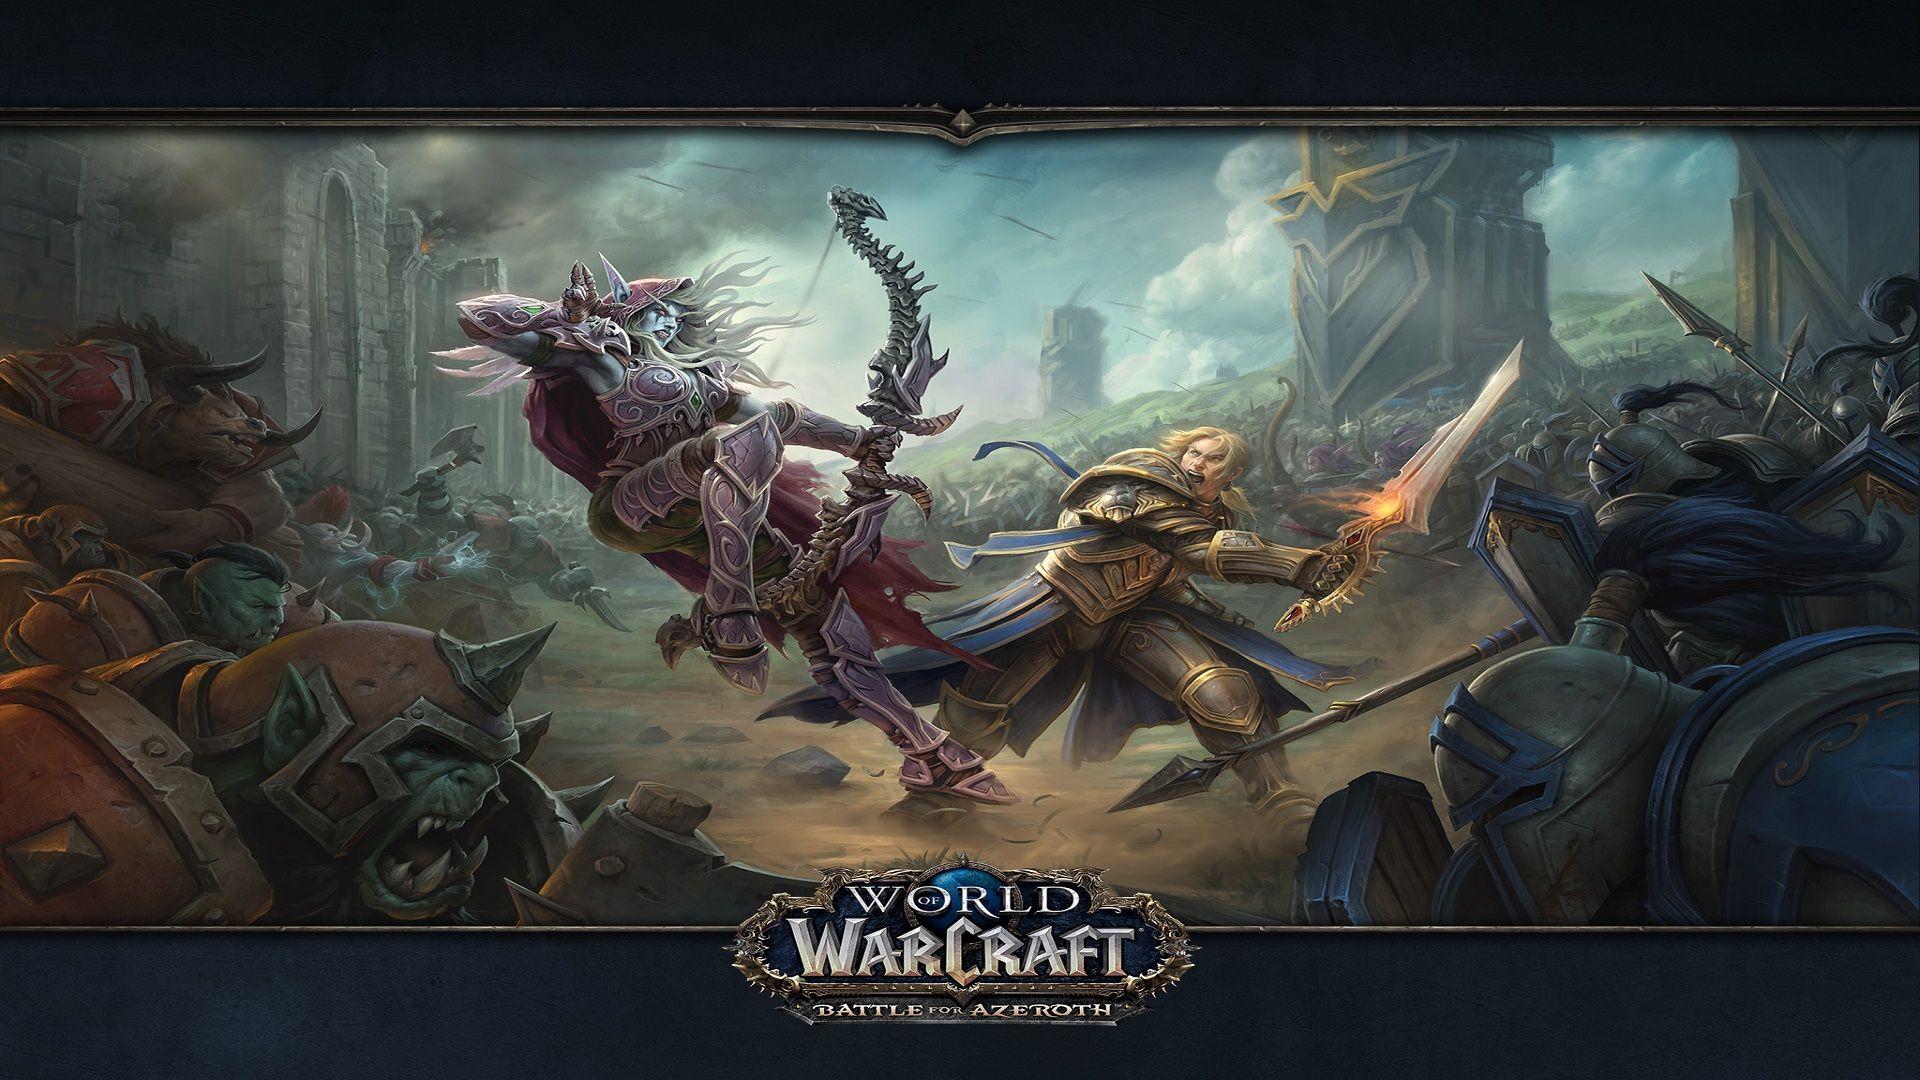 World of Warcraft: Battle for Azeroth Wallpapers